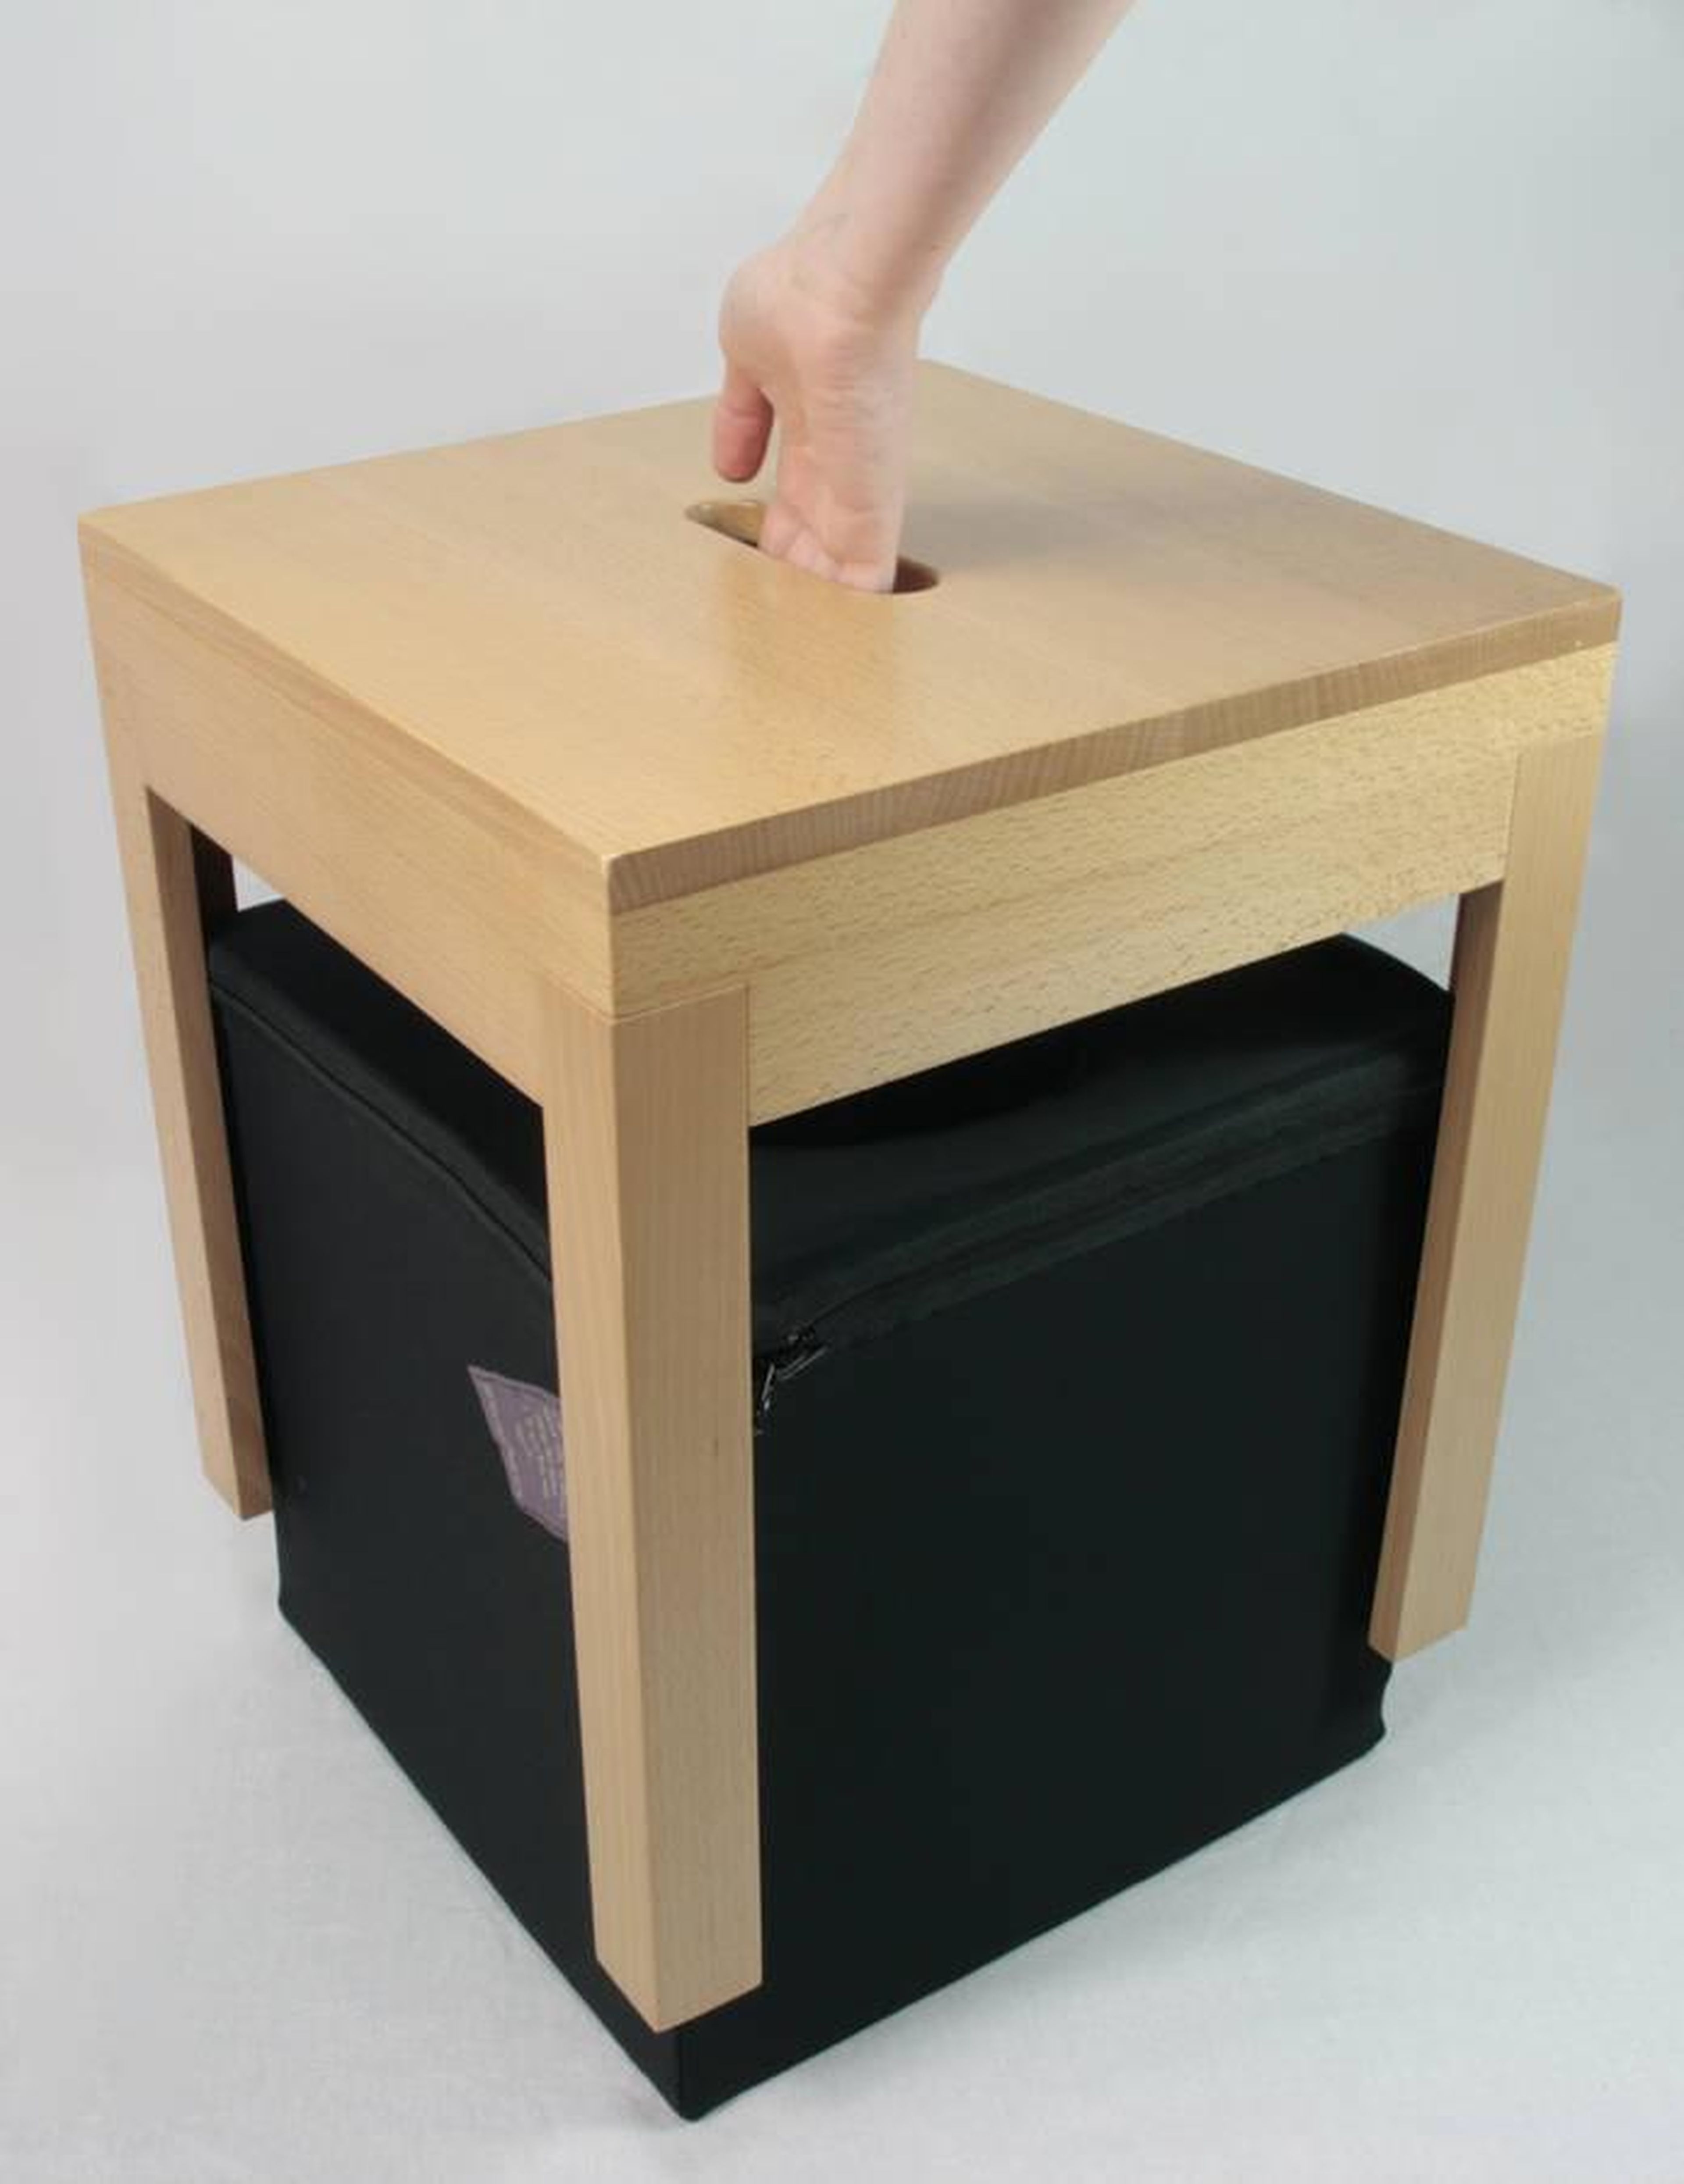 The "thought box" can be stored underneath its stool.